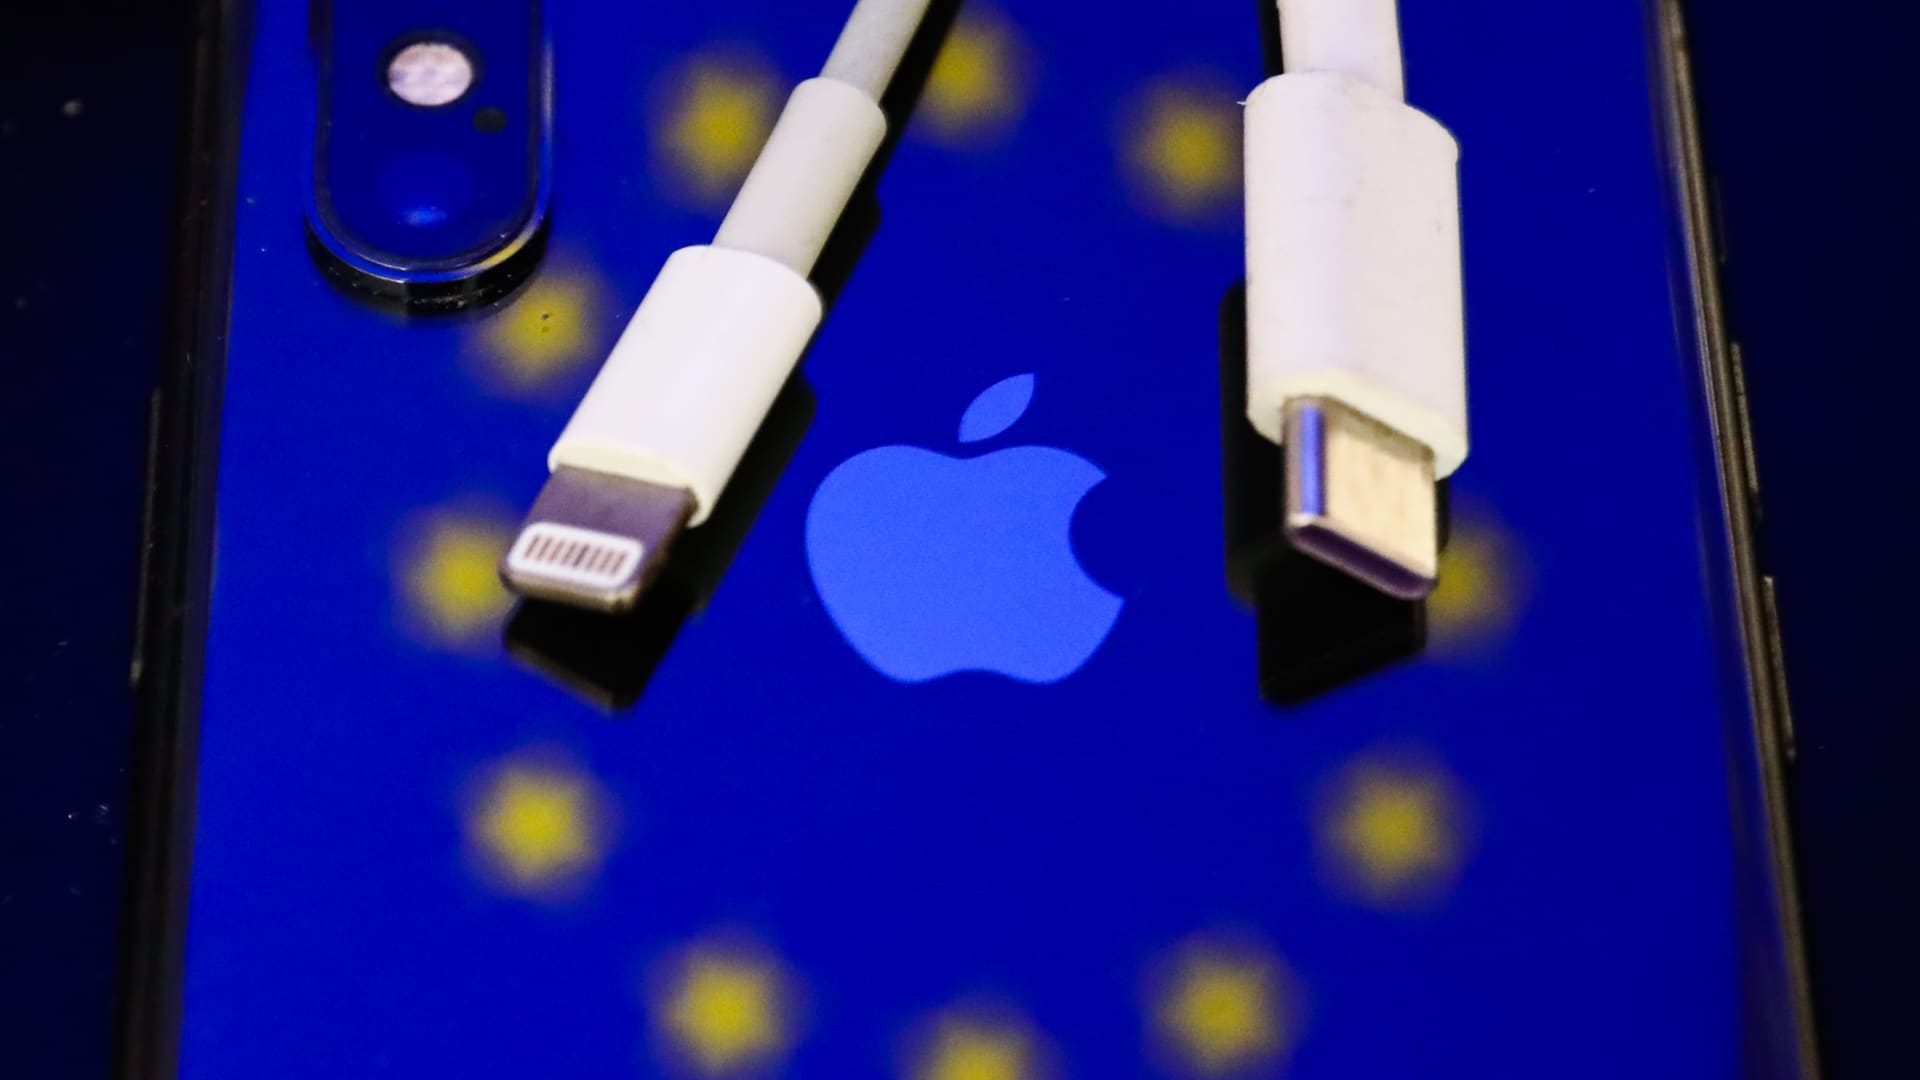 iphones-will-get-usb-c-charging-after-apple-says-it-will-have-to-comply-with-eu-law